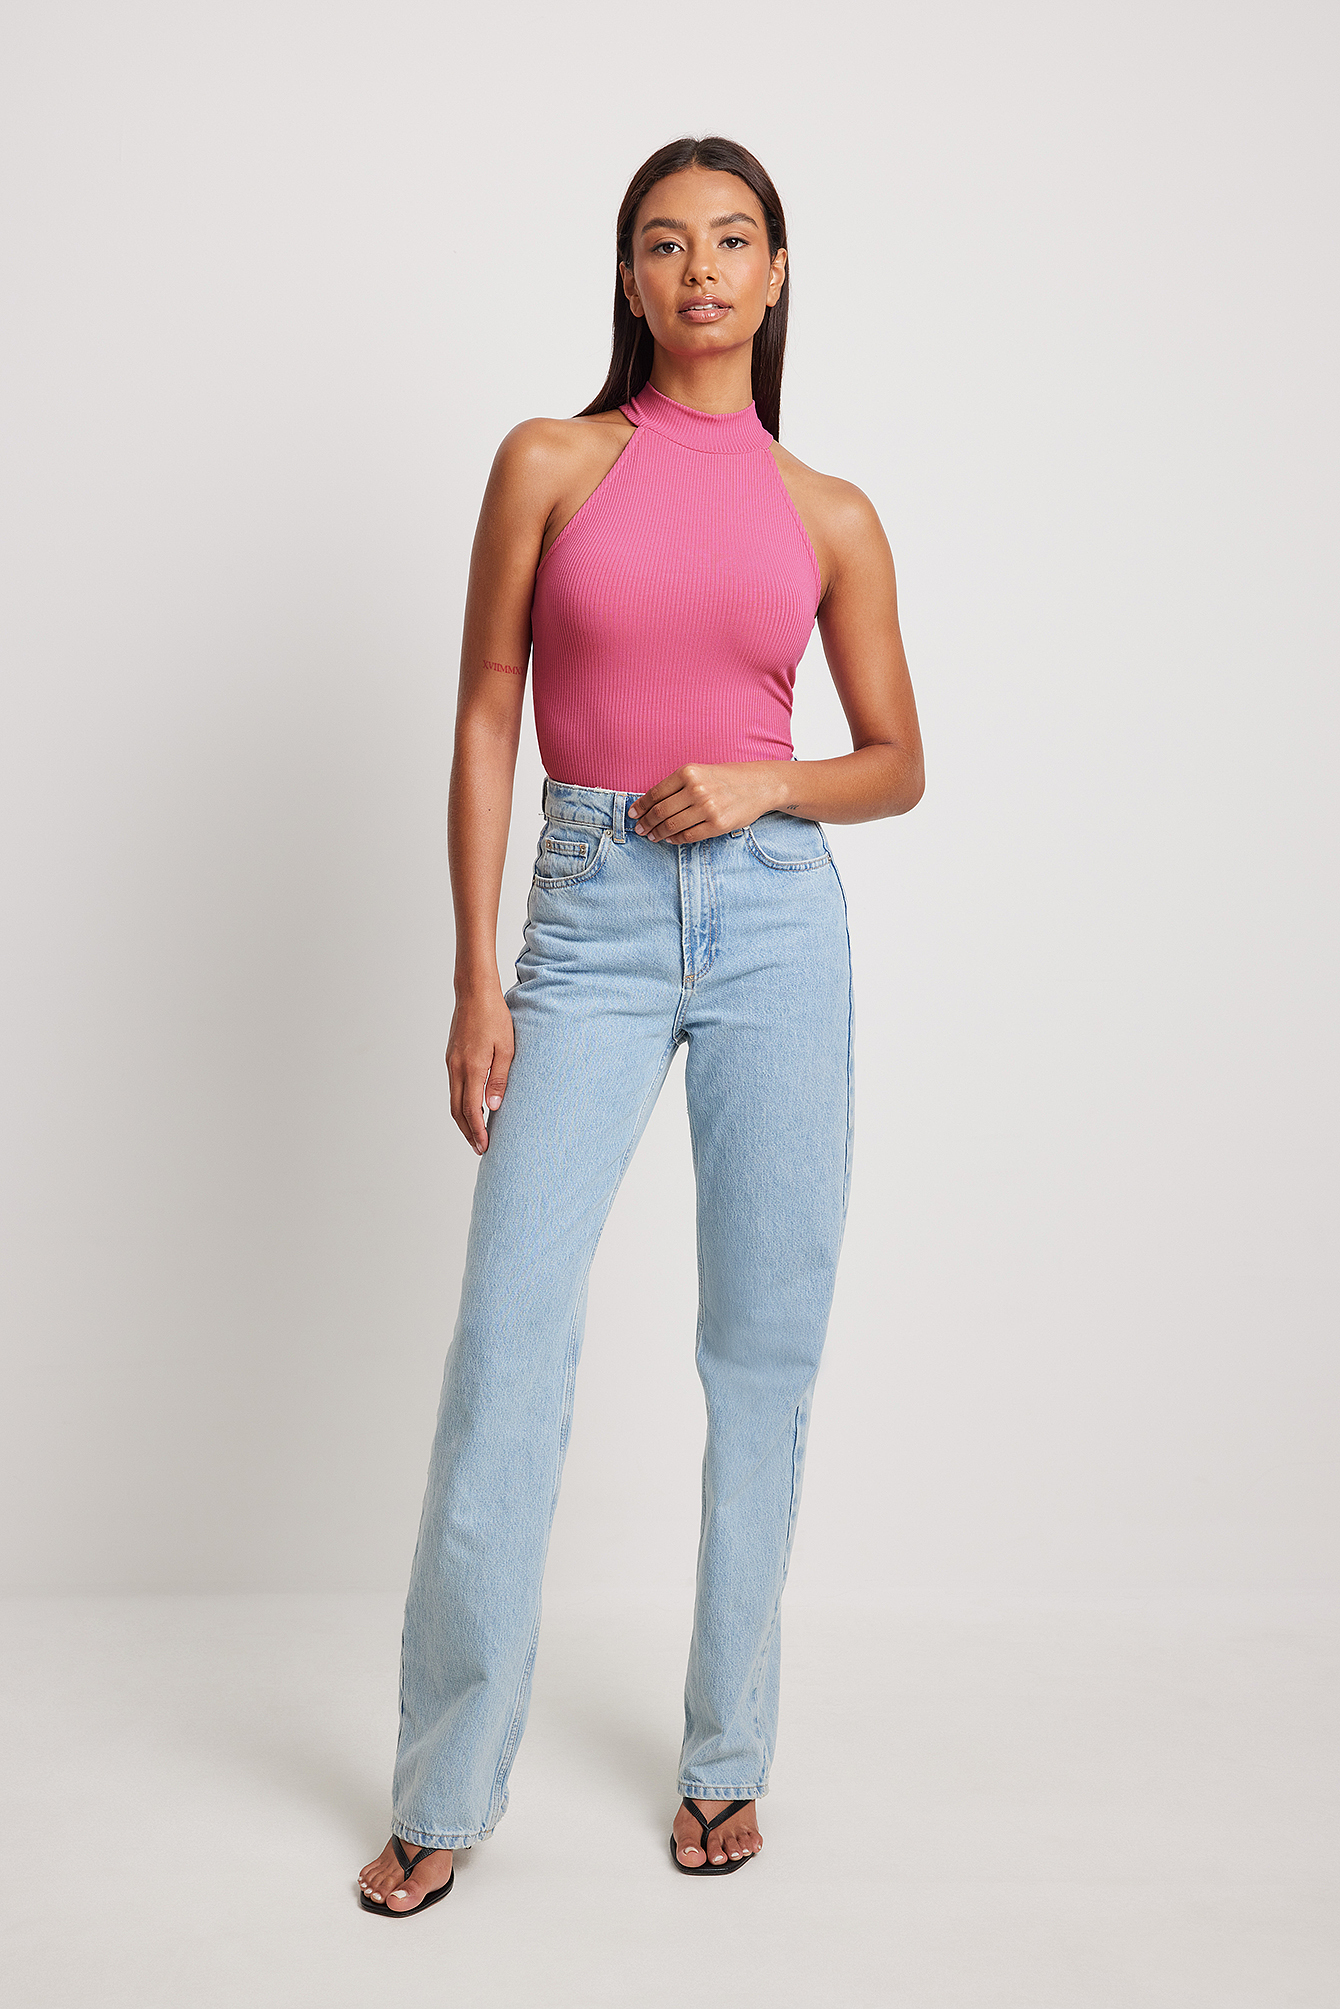 High Neck Rib Top Outfit